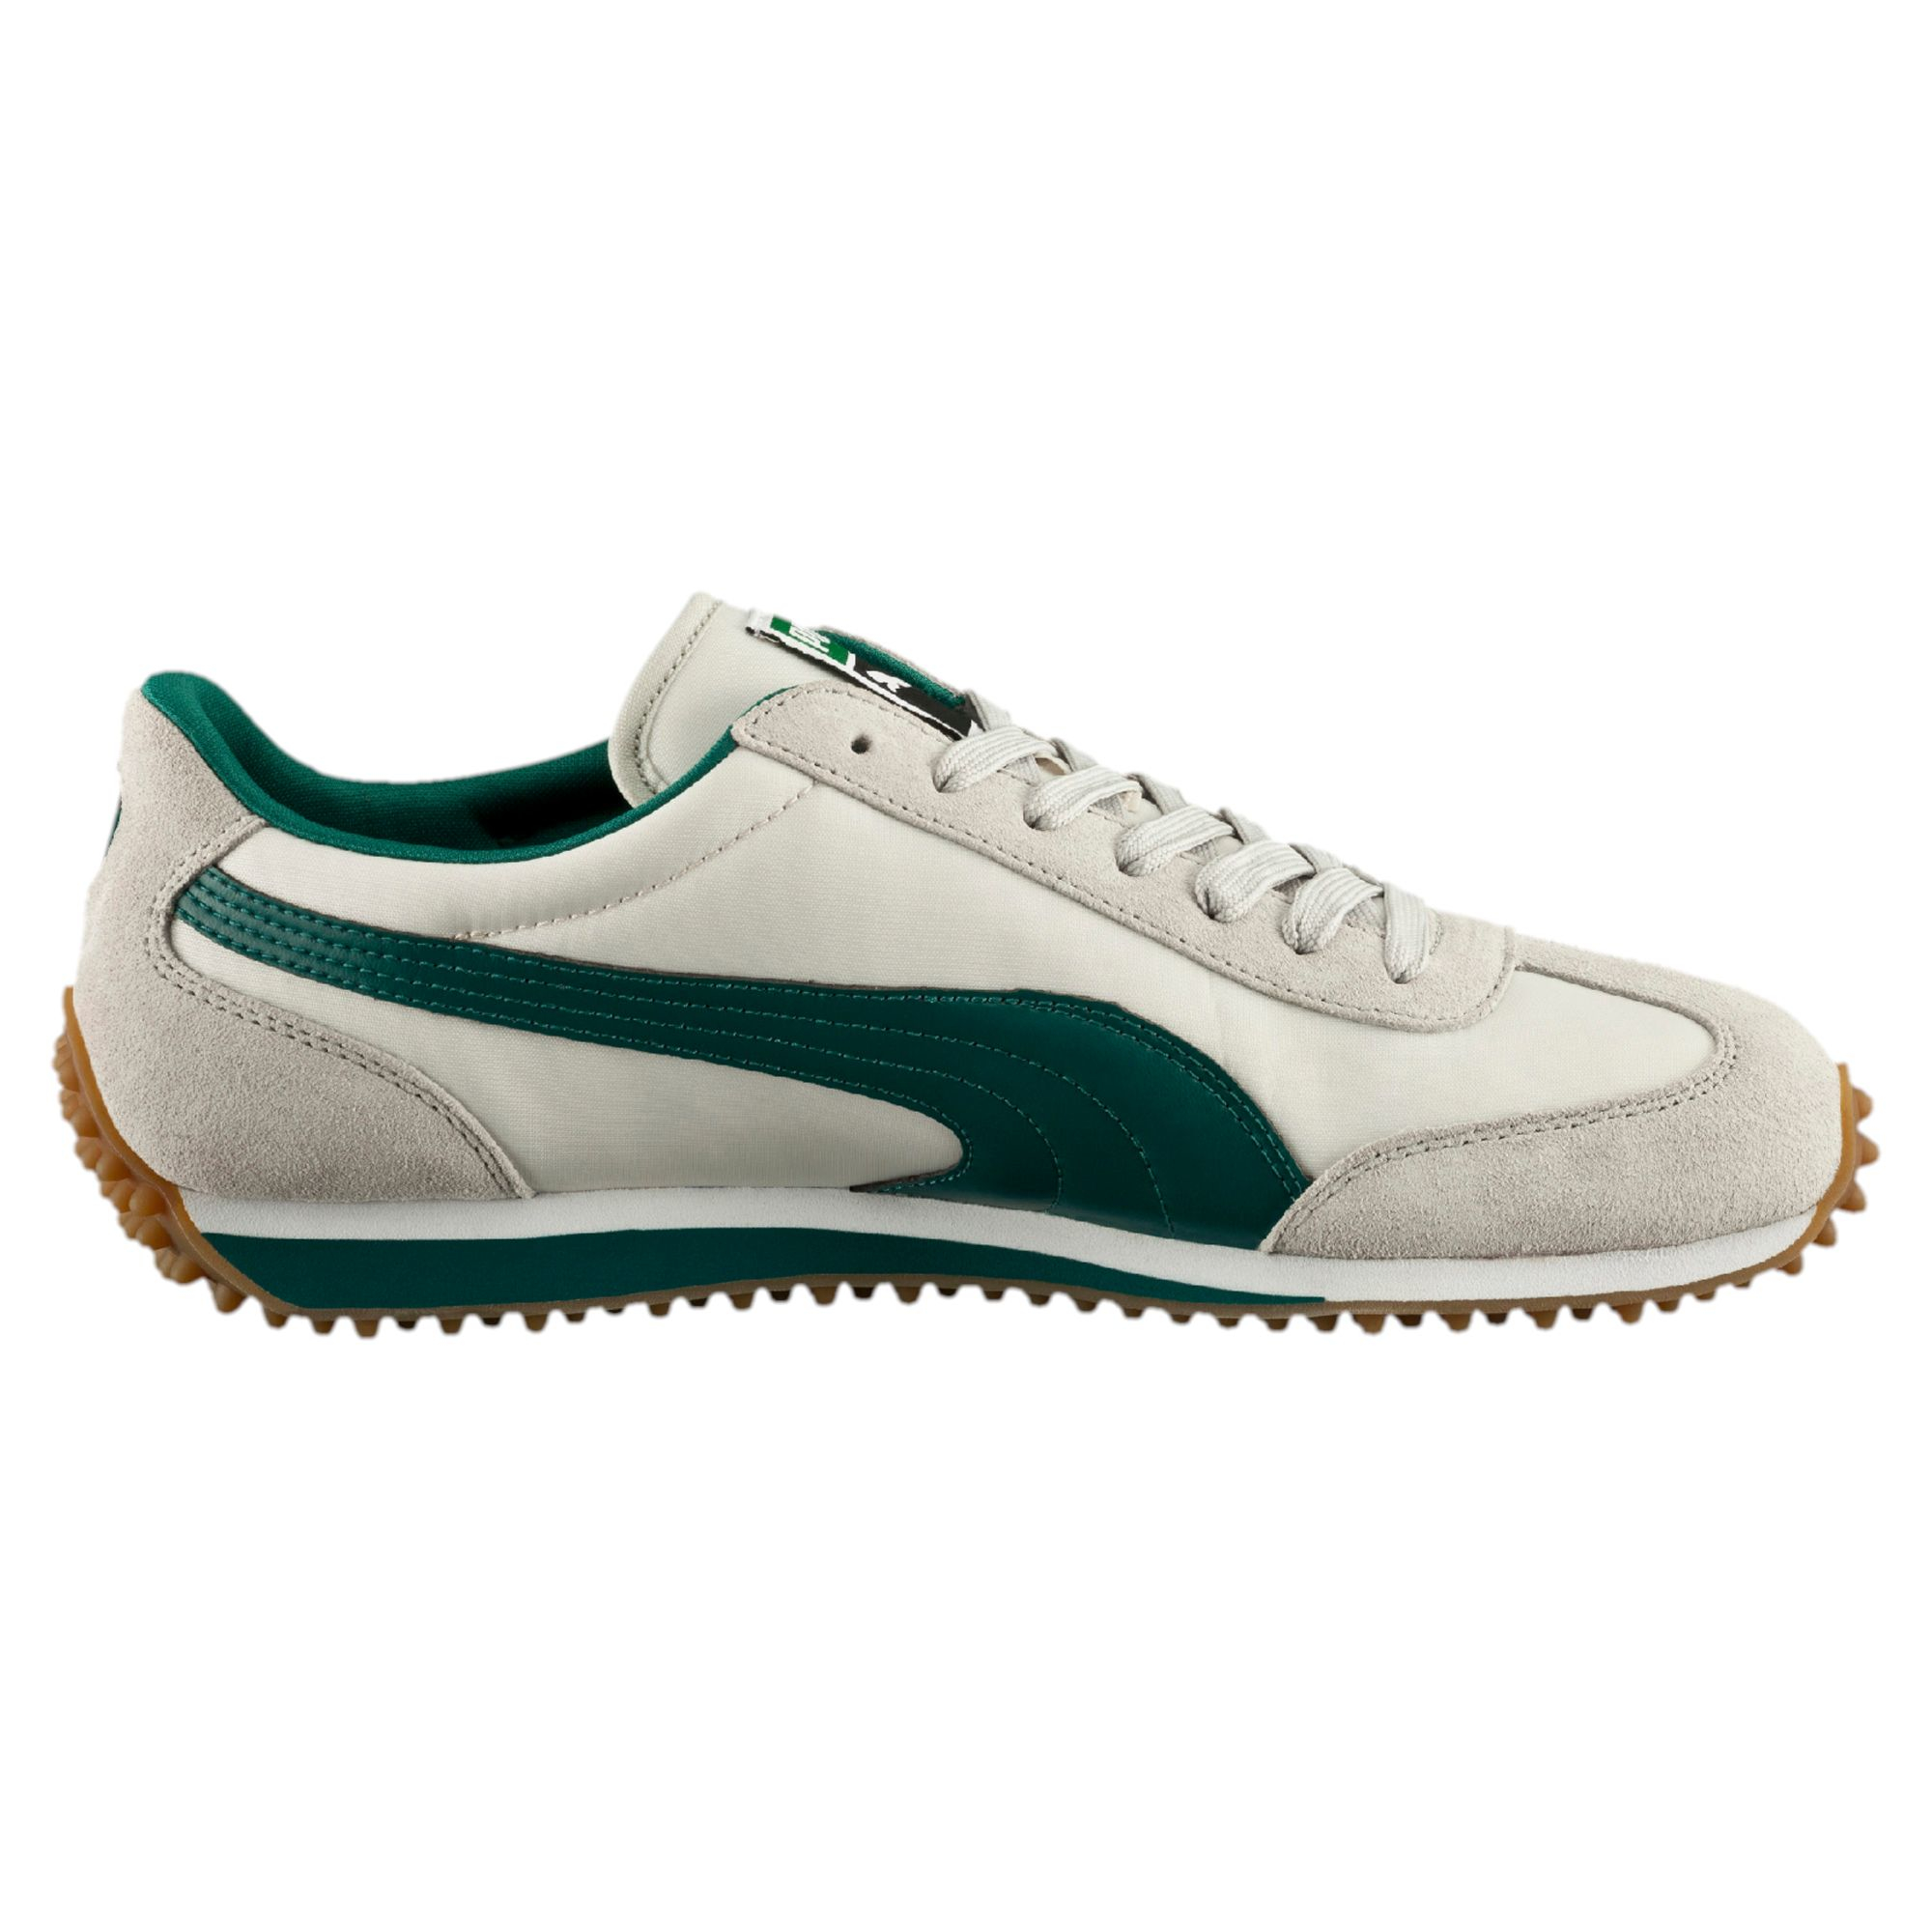 PUMA Synthetic Whirlwind Classic Men's Sneakers in Green for Men - Lyst